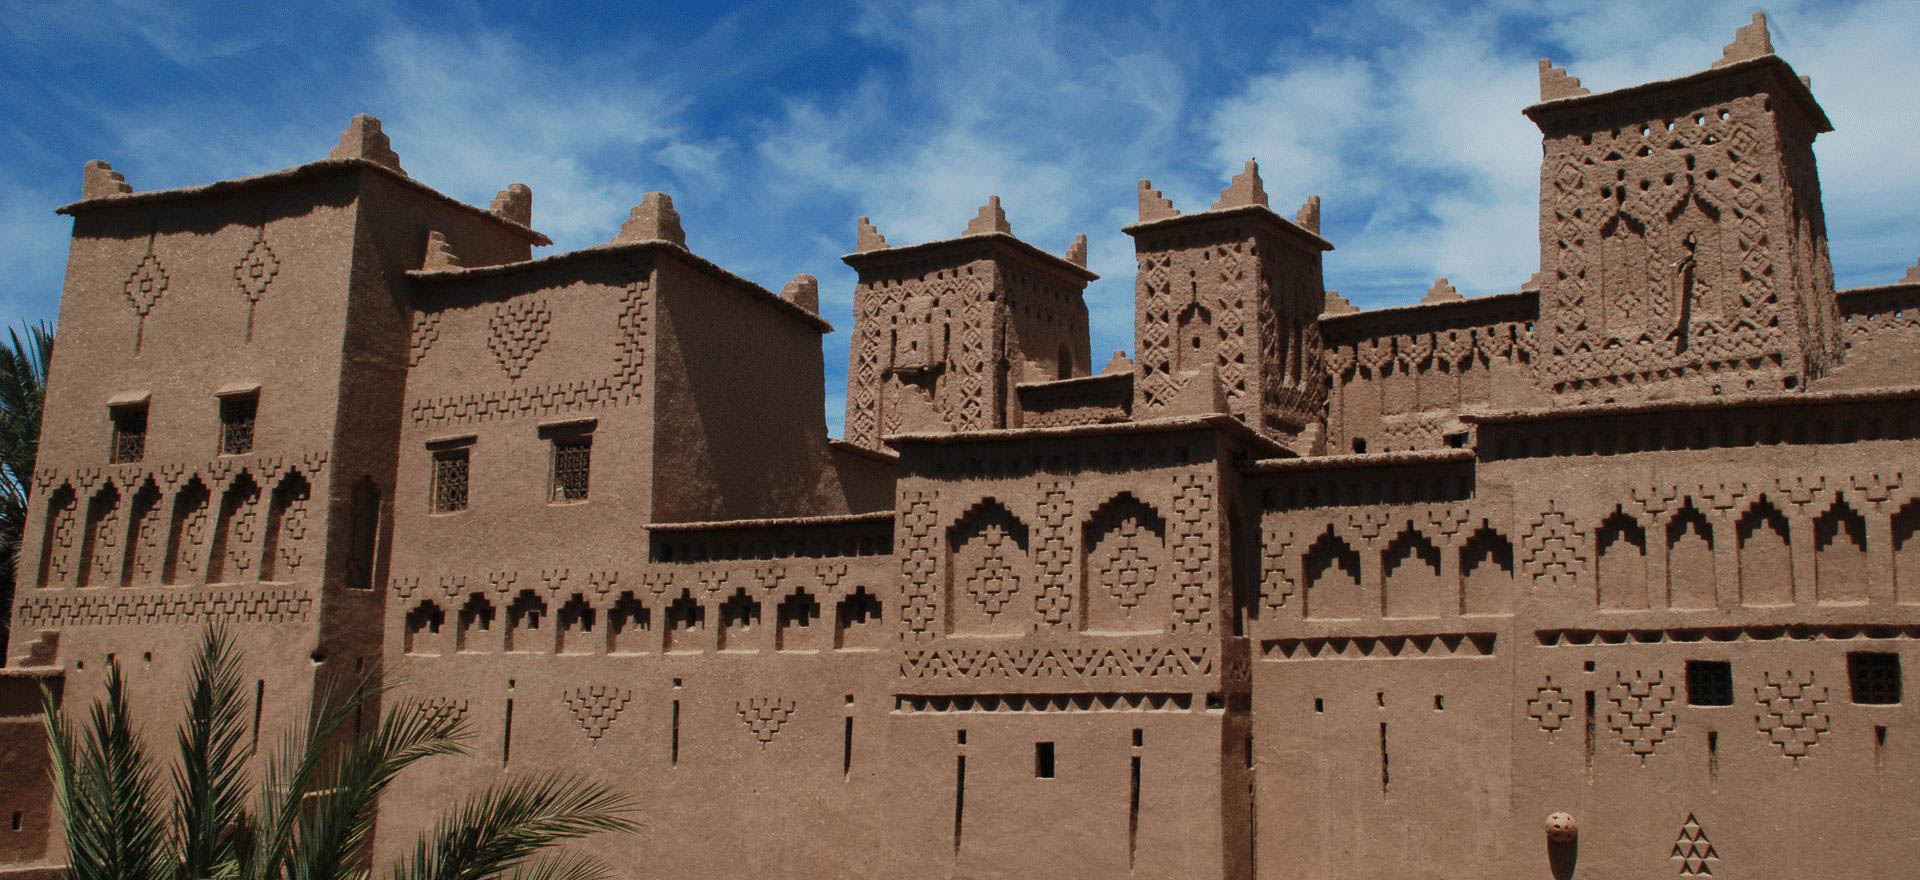 Traditional mud casbahs of southern Morocco - Morocco and Western Sahara Holidays and Tours